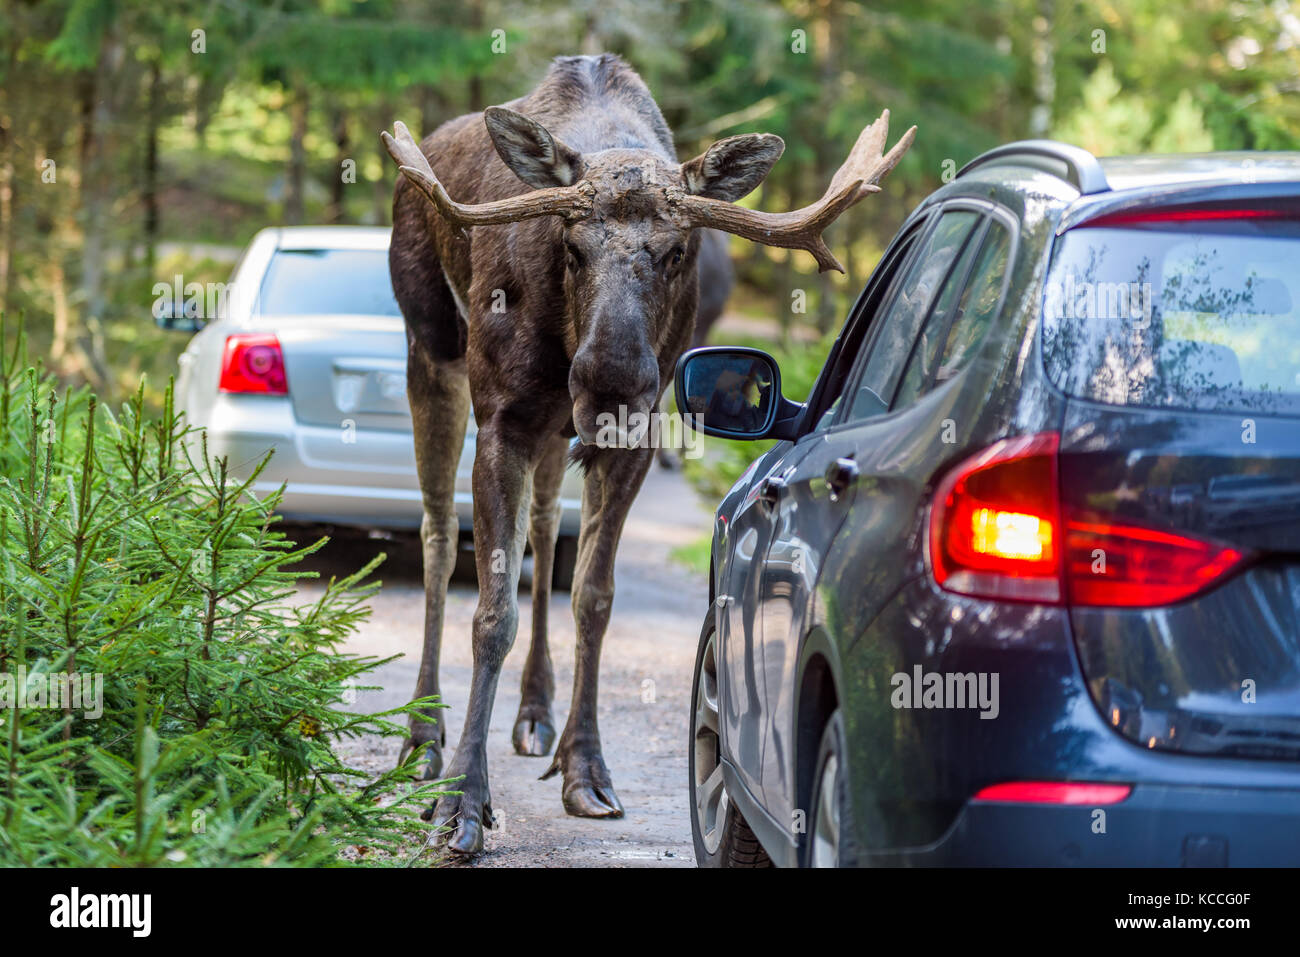 Giant Moose On Road